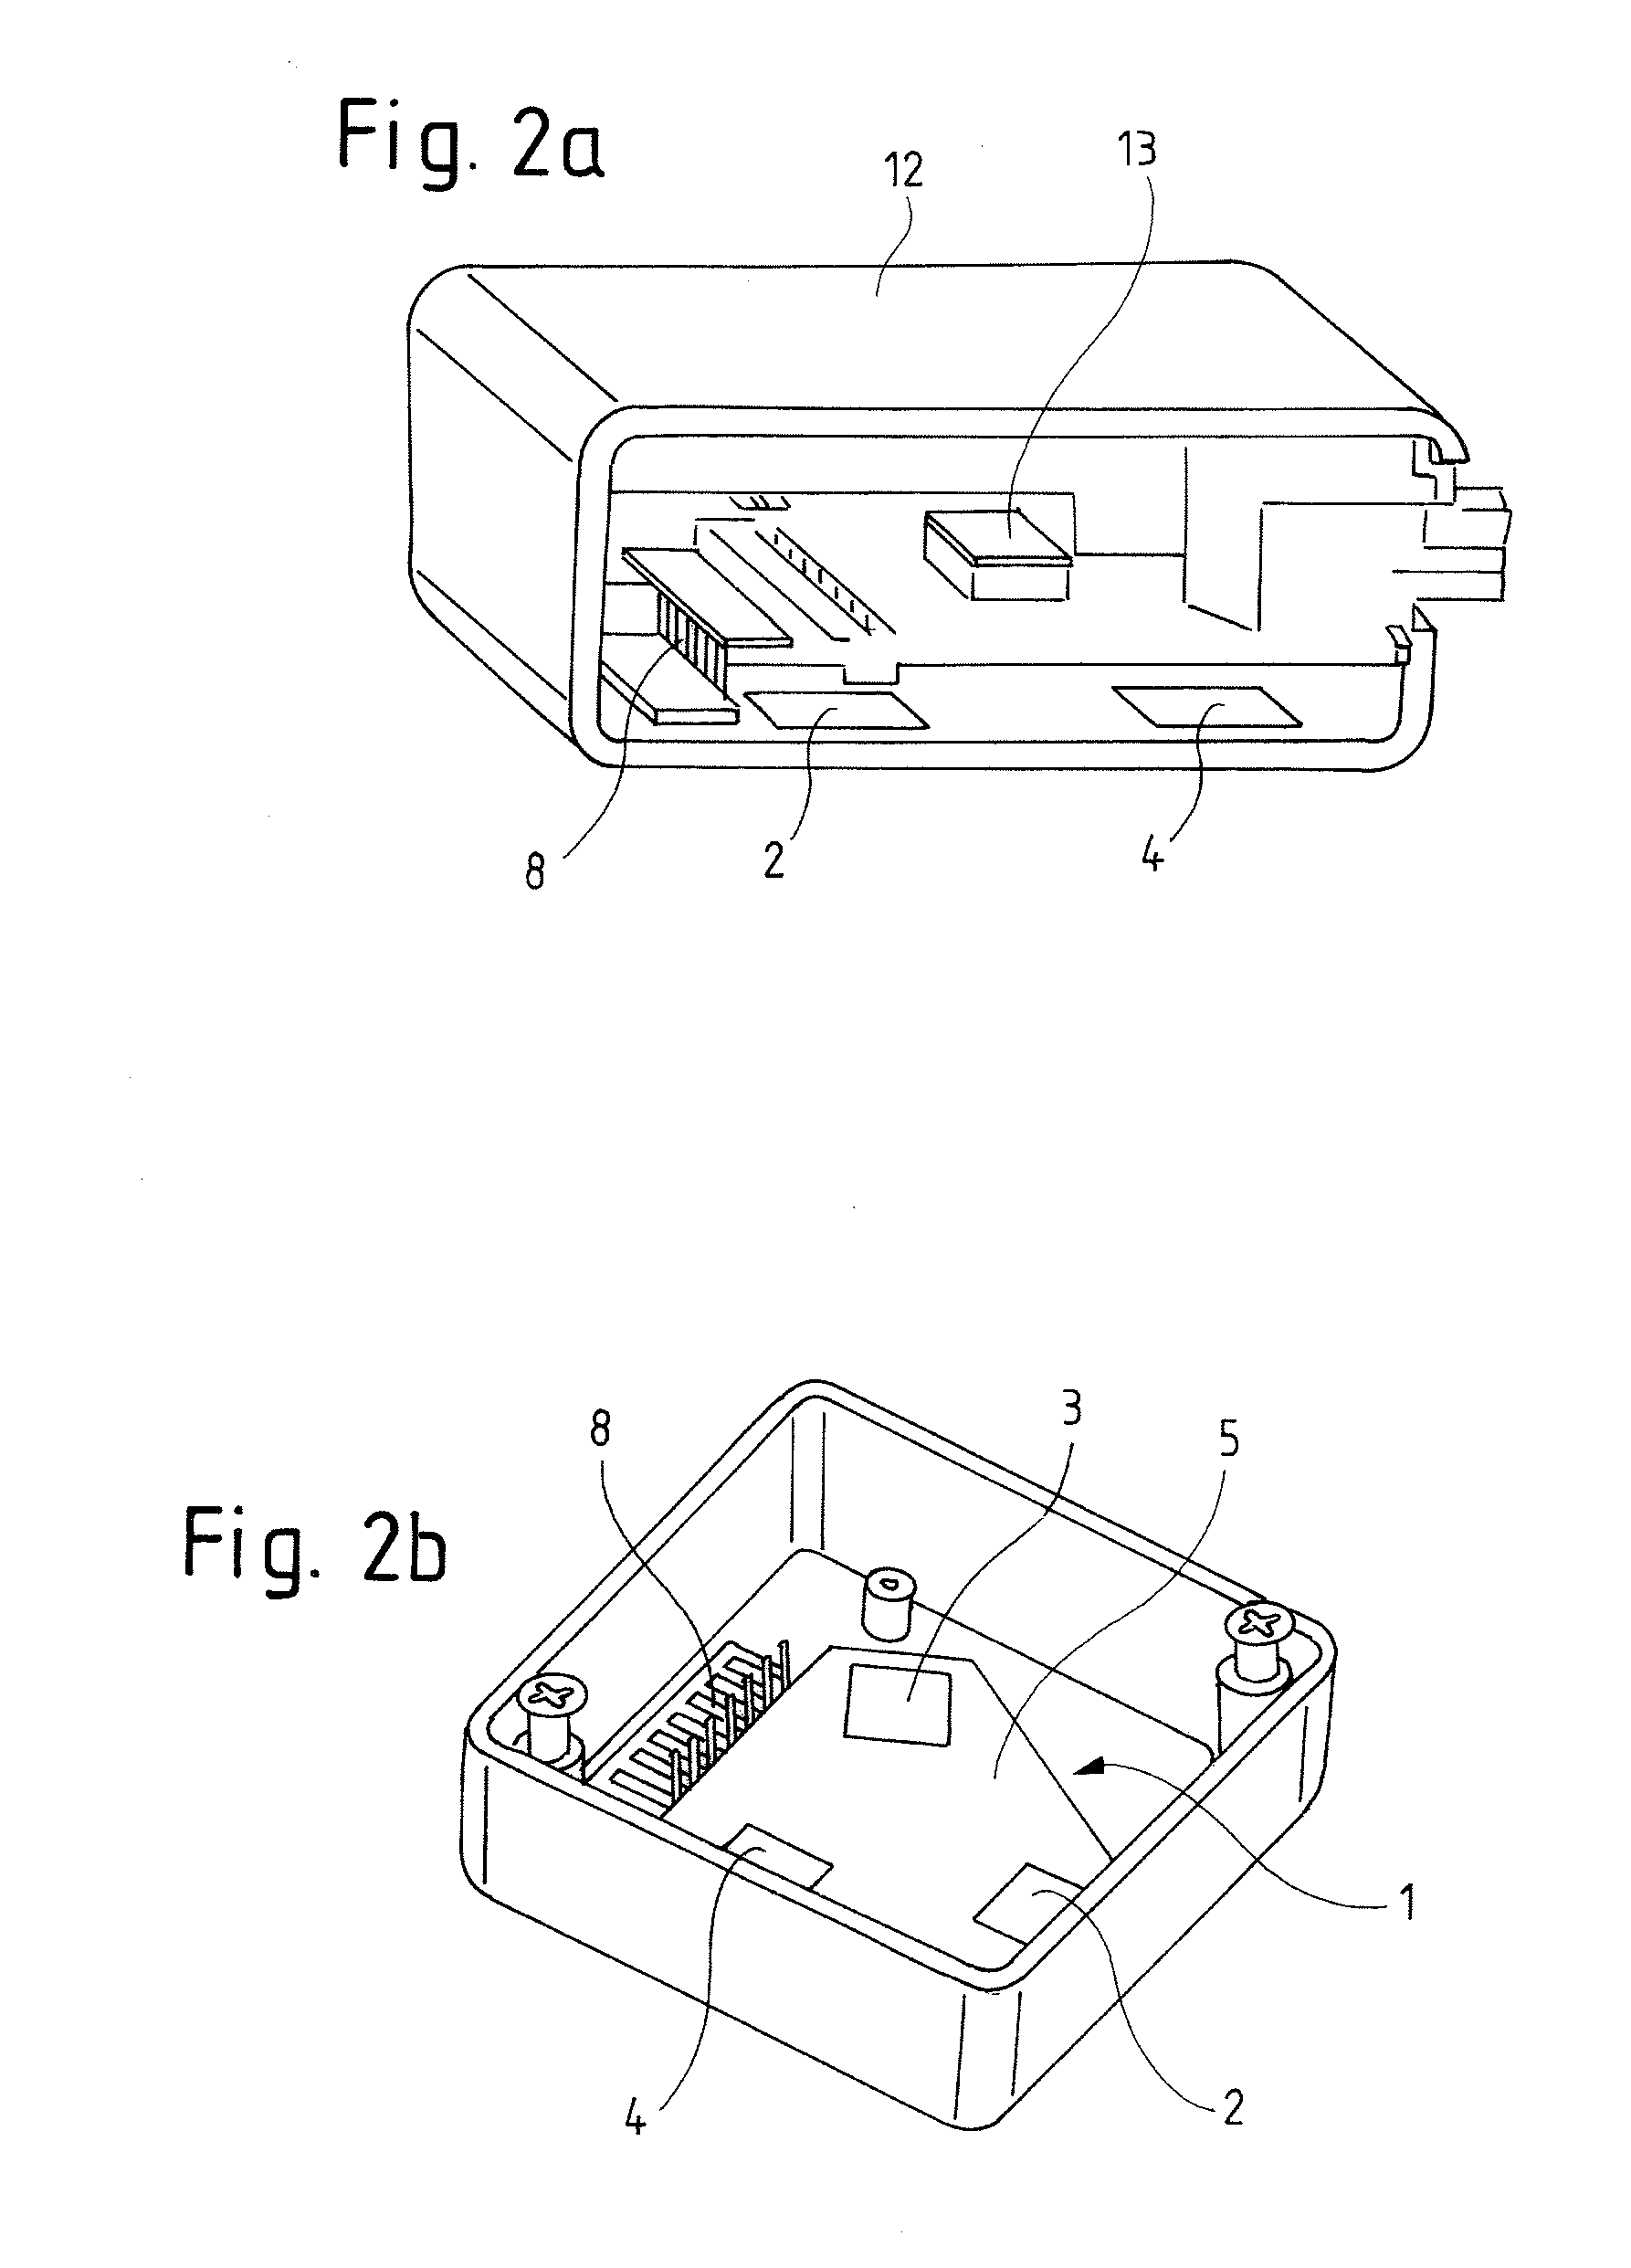 Device and method for detecting at least one structure-borne sound signal